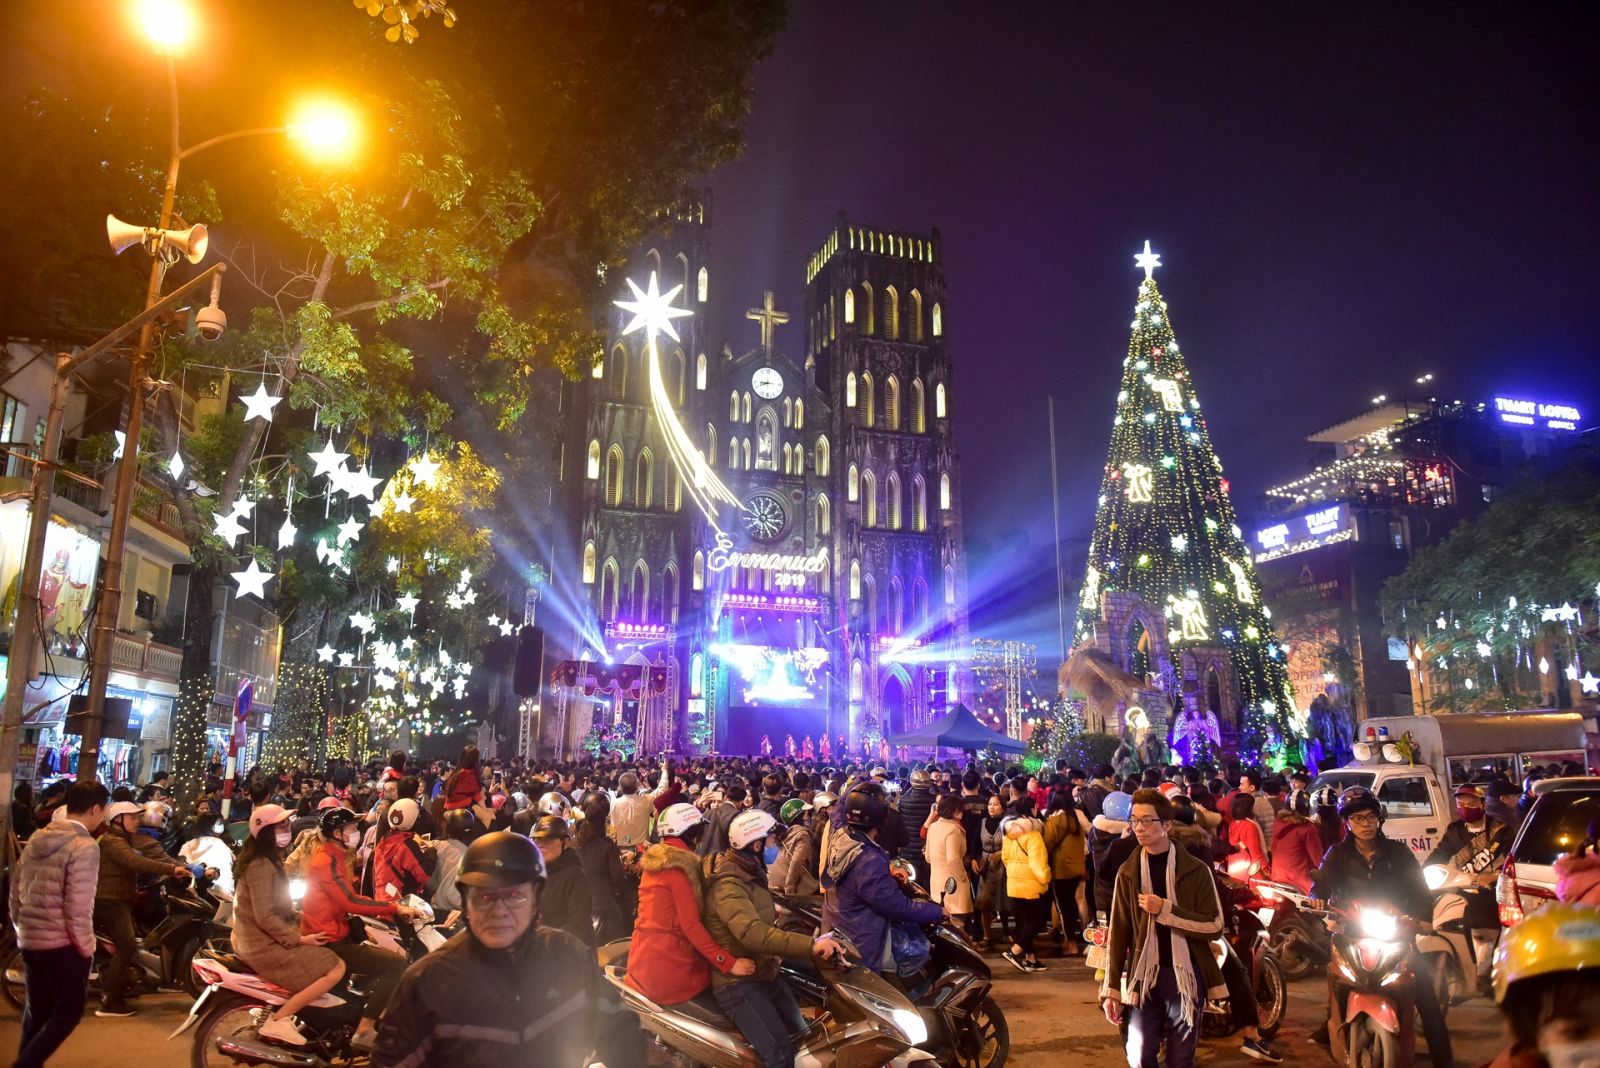 Top Places to celebrate Christmas holidays in Vietnam